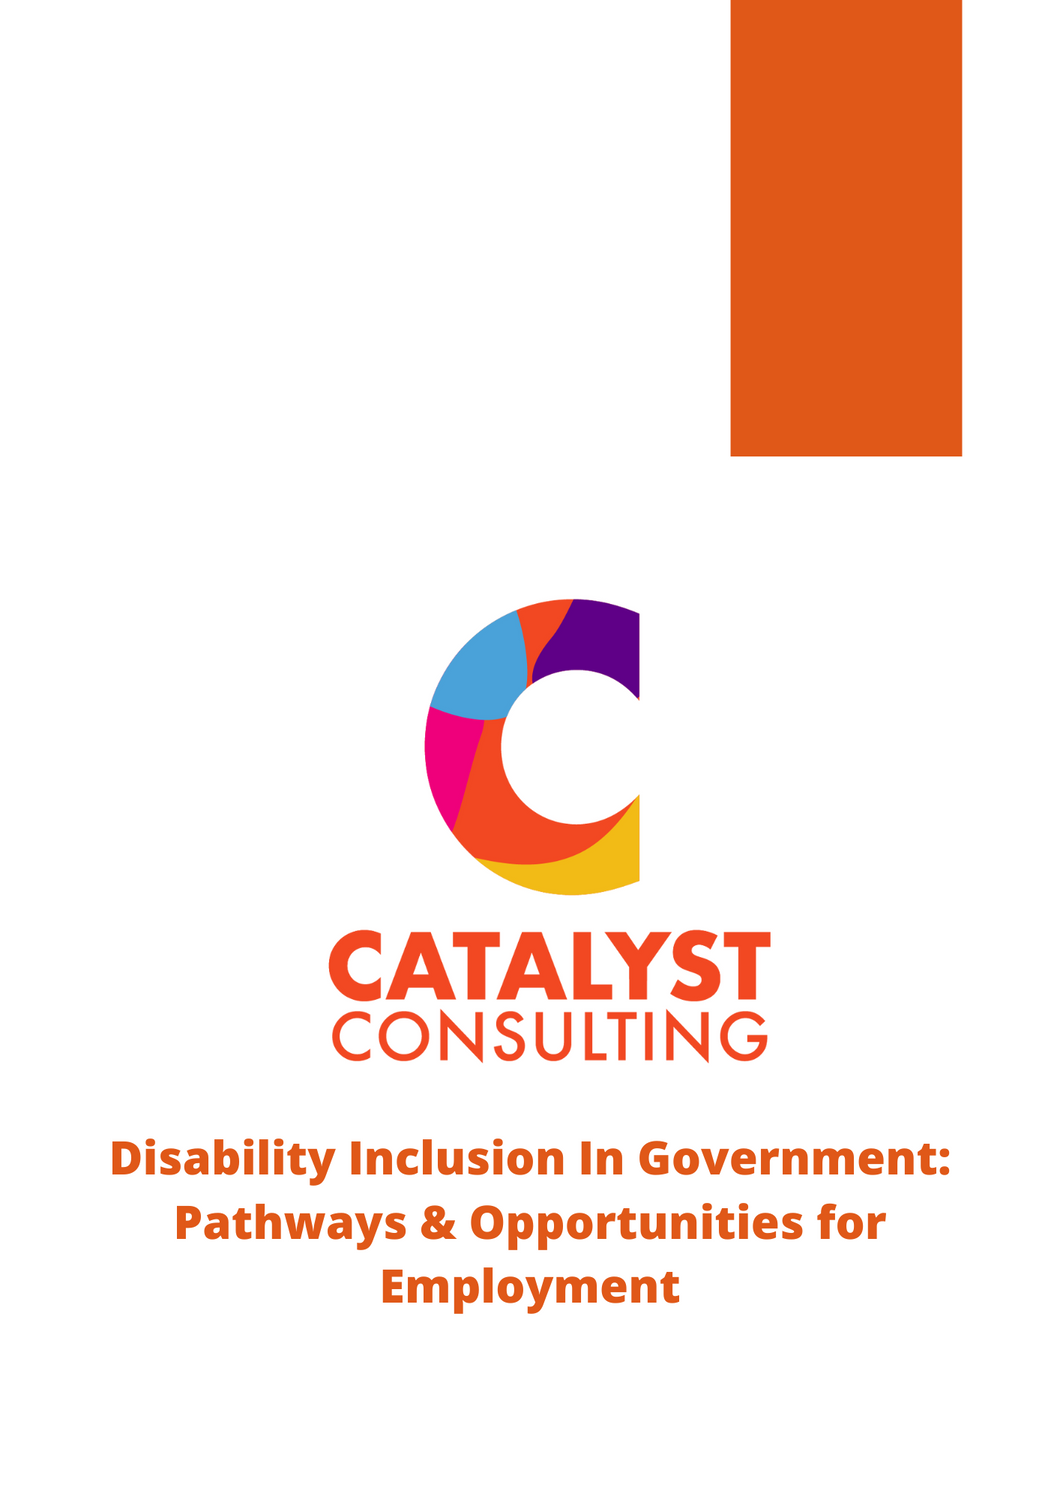 Disability Inclusion in Government: Pathways & Opportunities for Employment